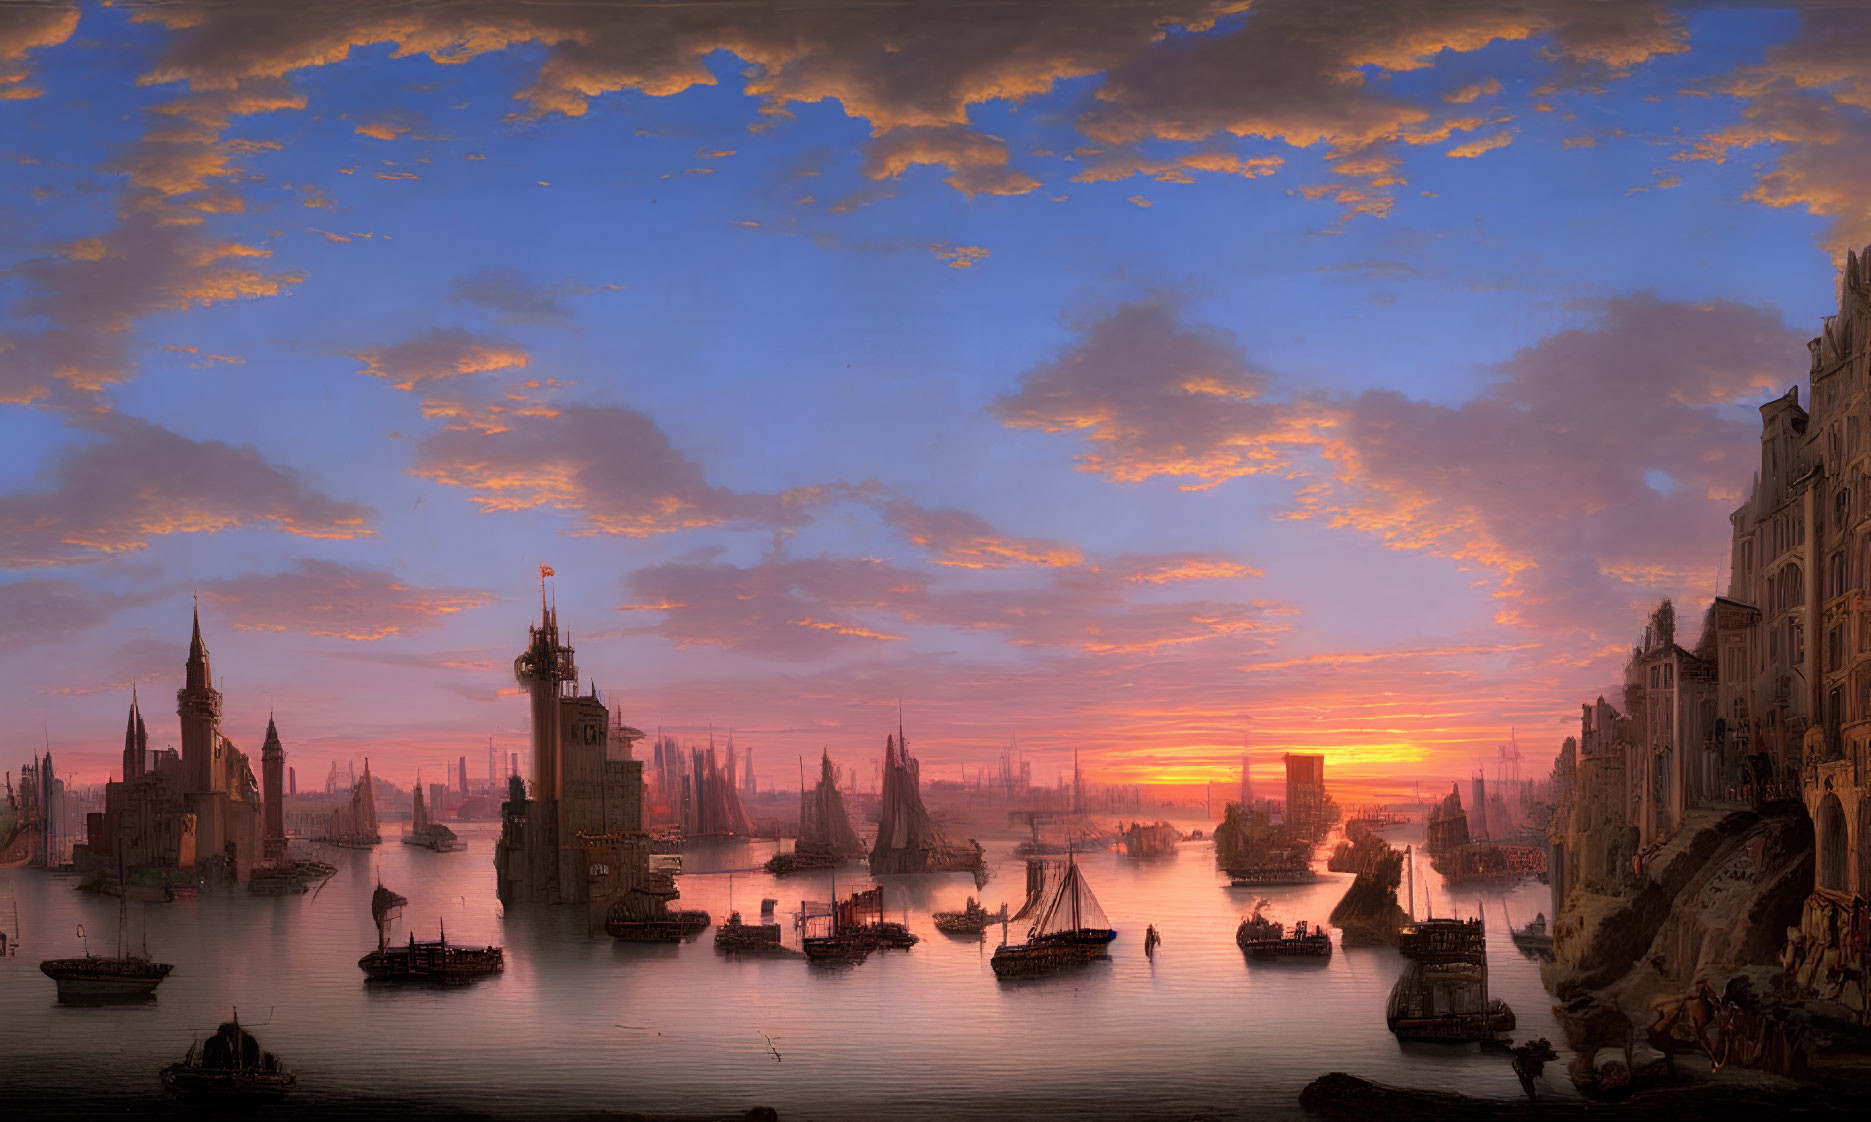 Harbor scene at sunset with ships and ornate buildings